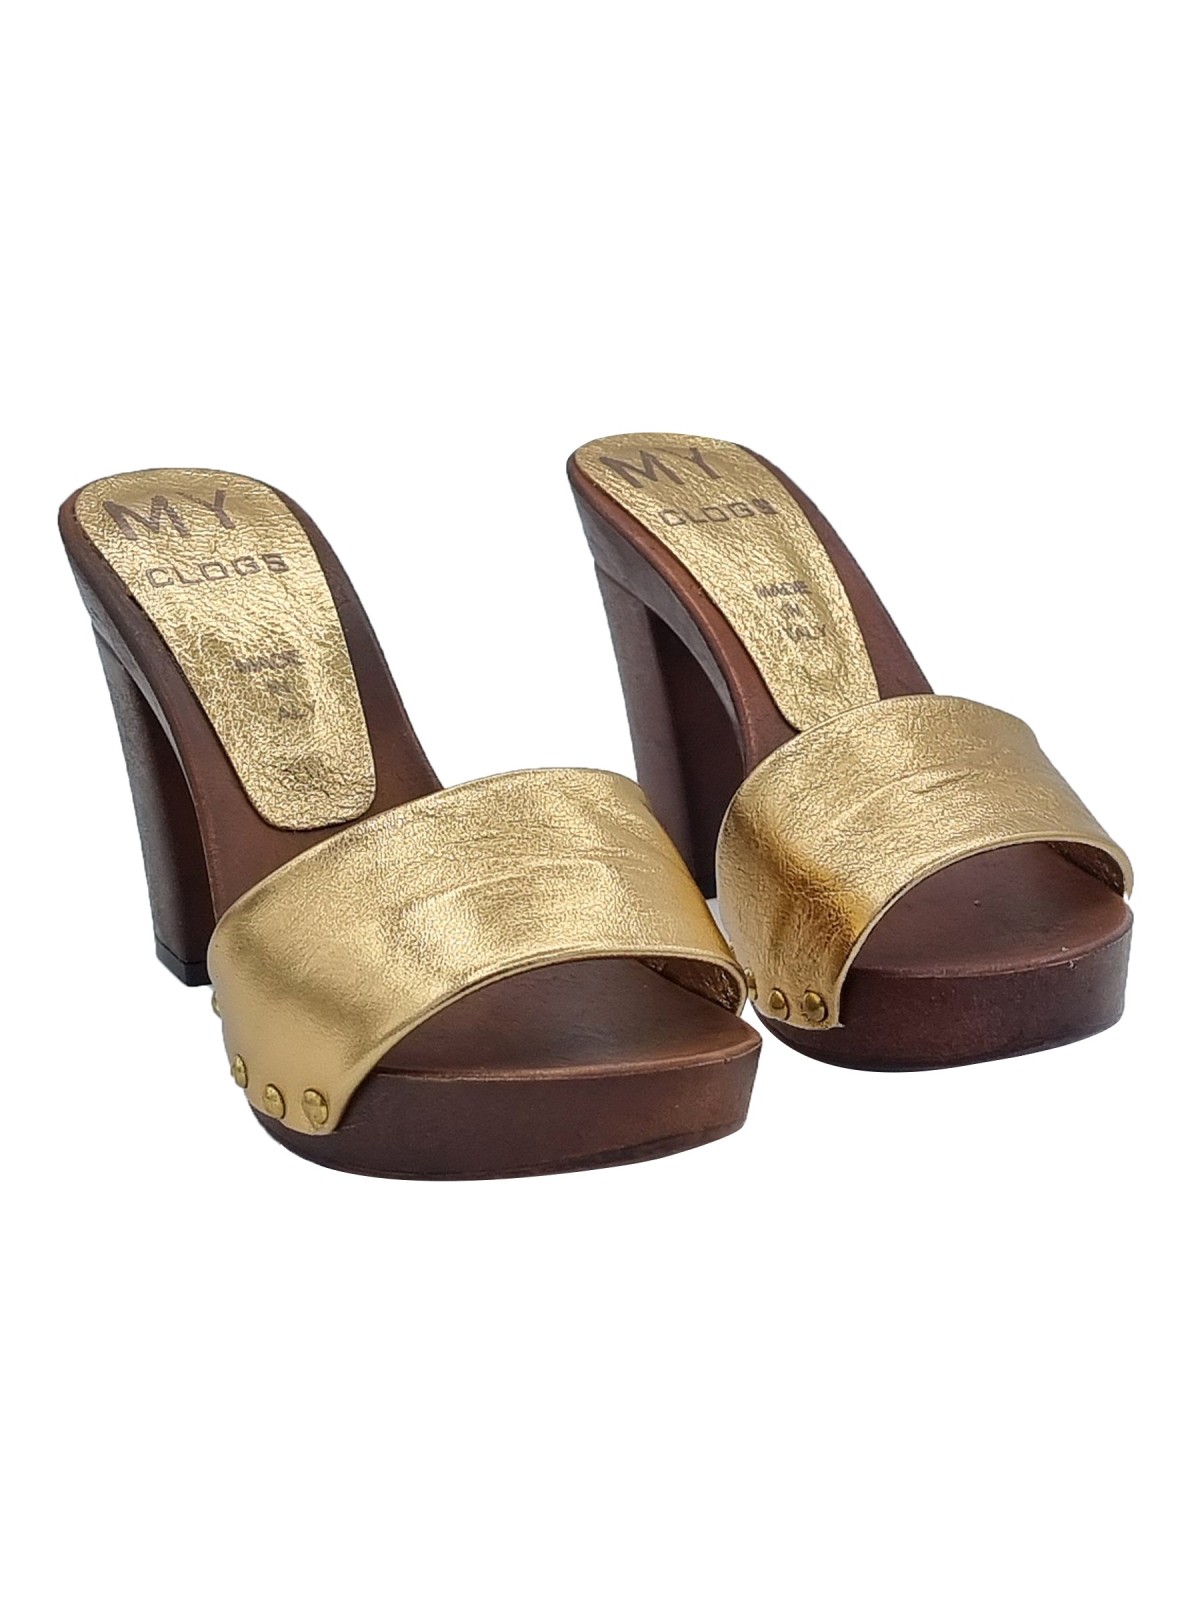 CLOGS WITH GOLD LEATHER BAND AND HEEL 10 CM